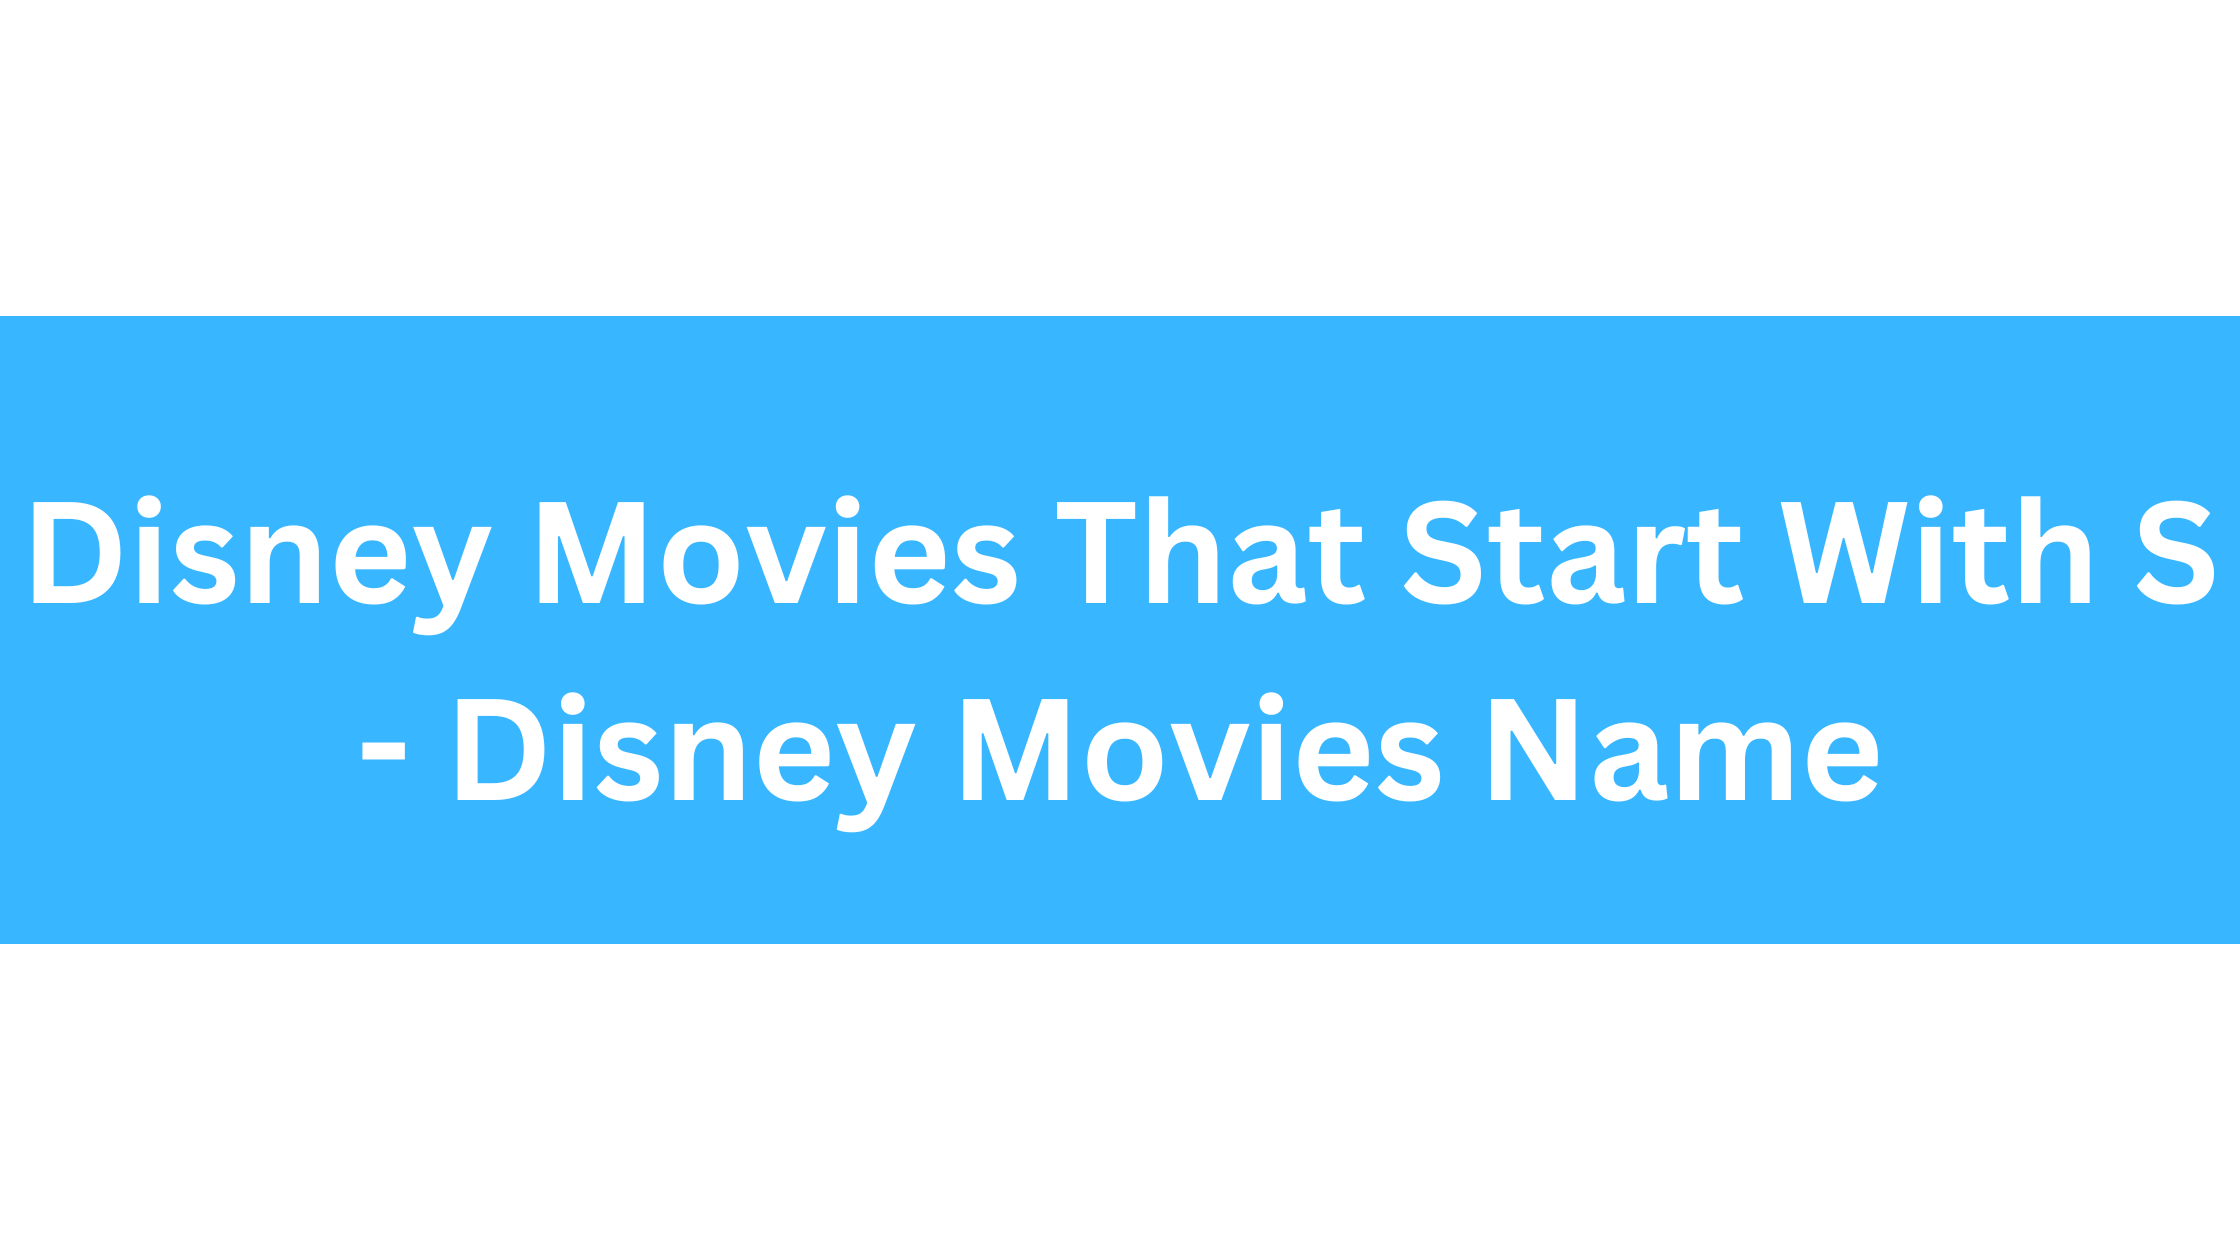 Disney Movies That Start With S